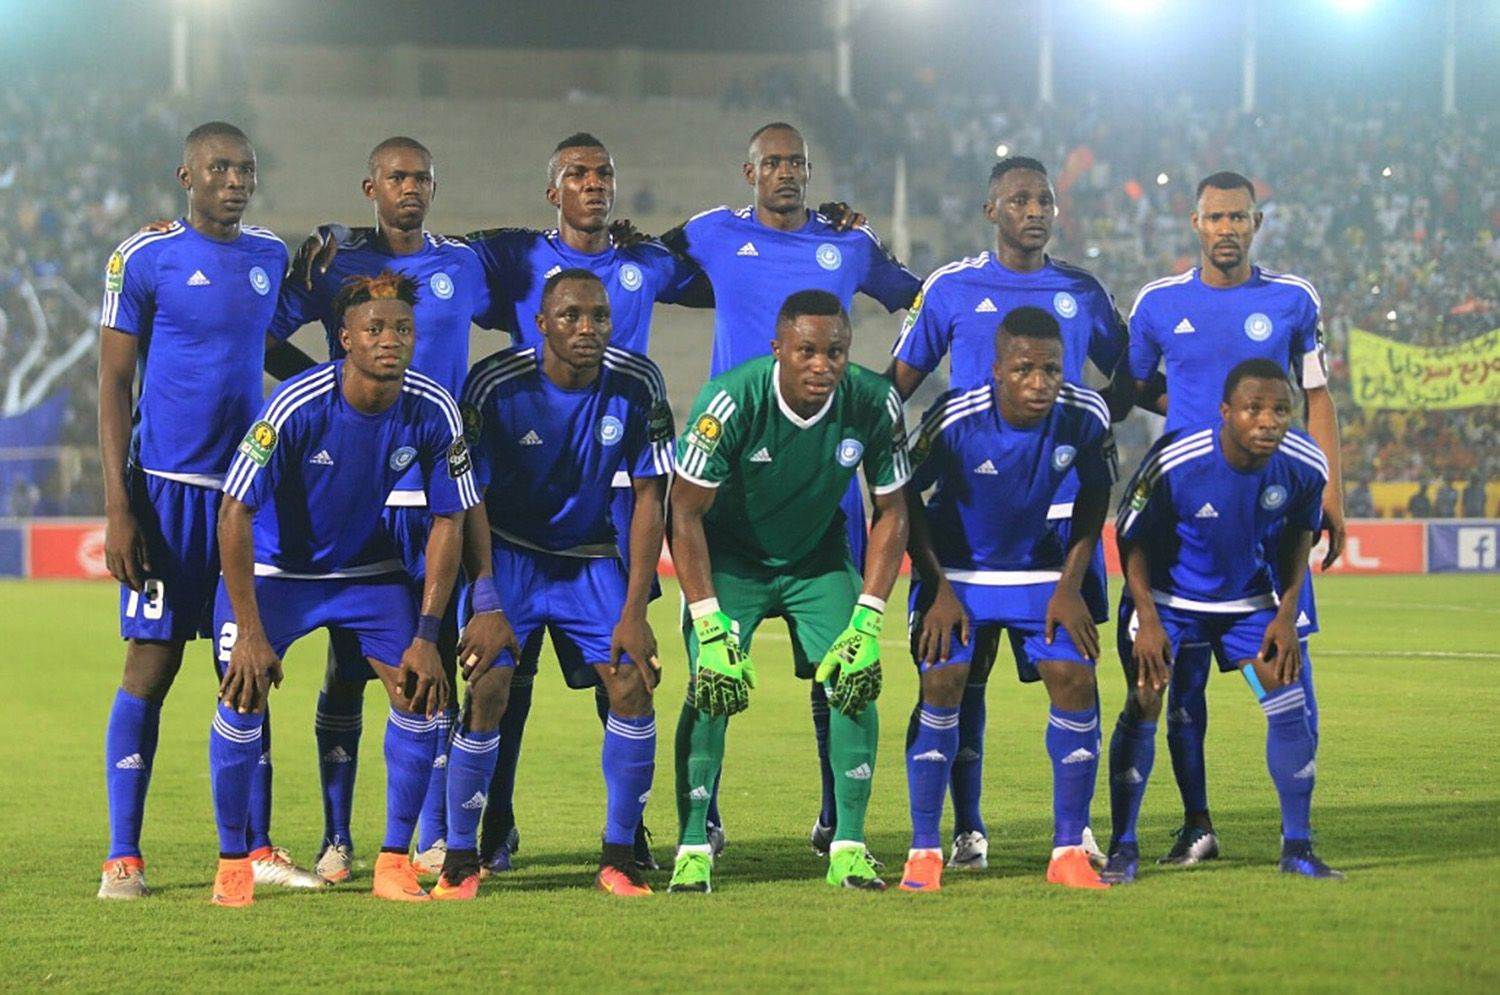 Al-Hilal - 8 appearances in the CAFCL group stage